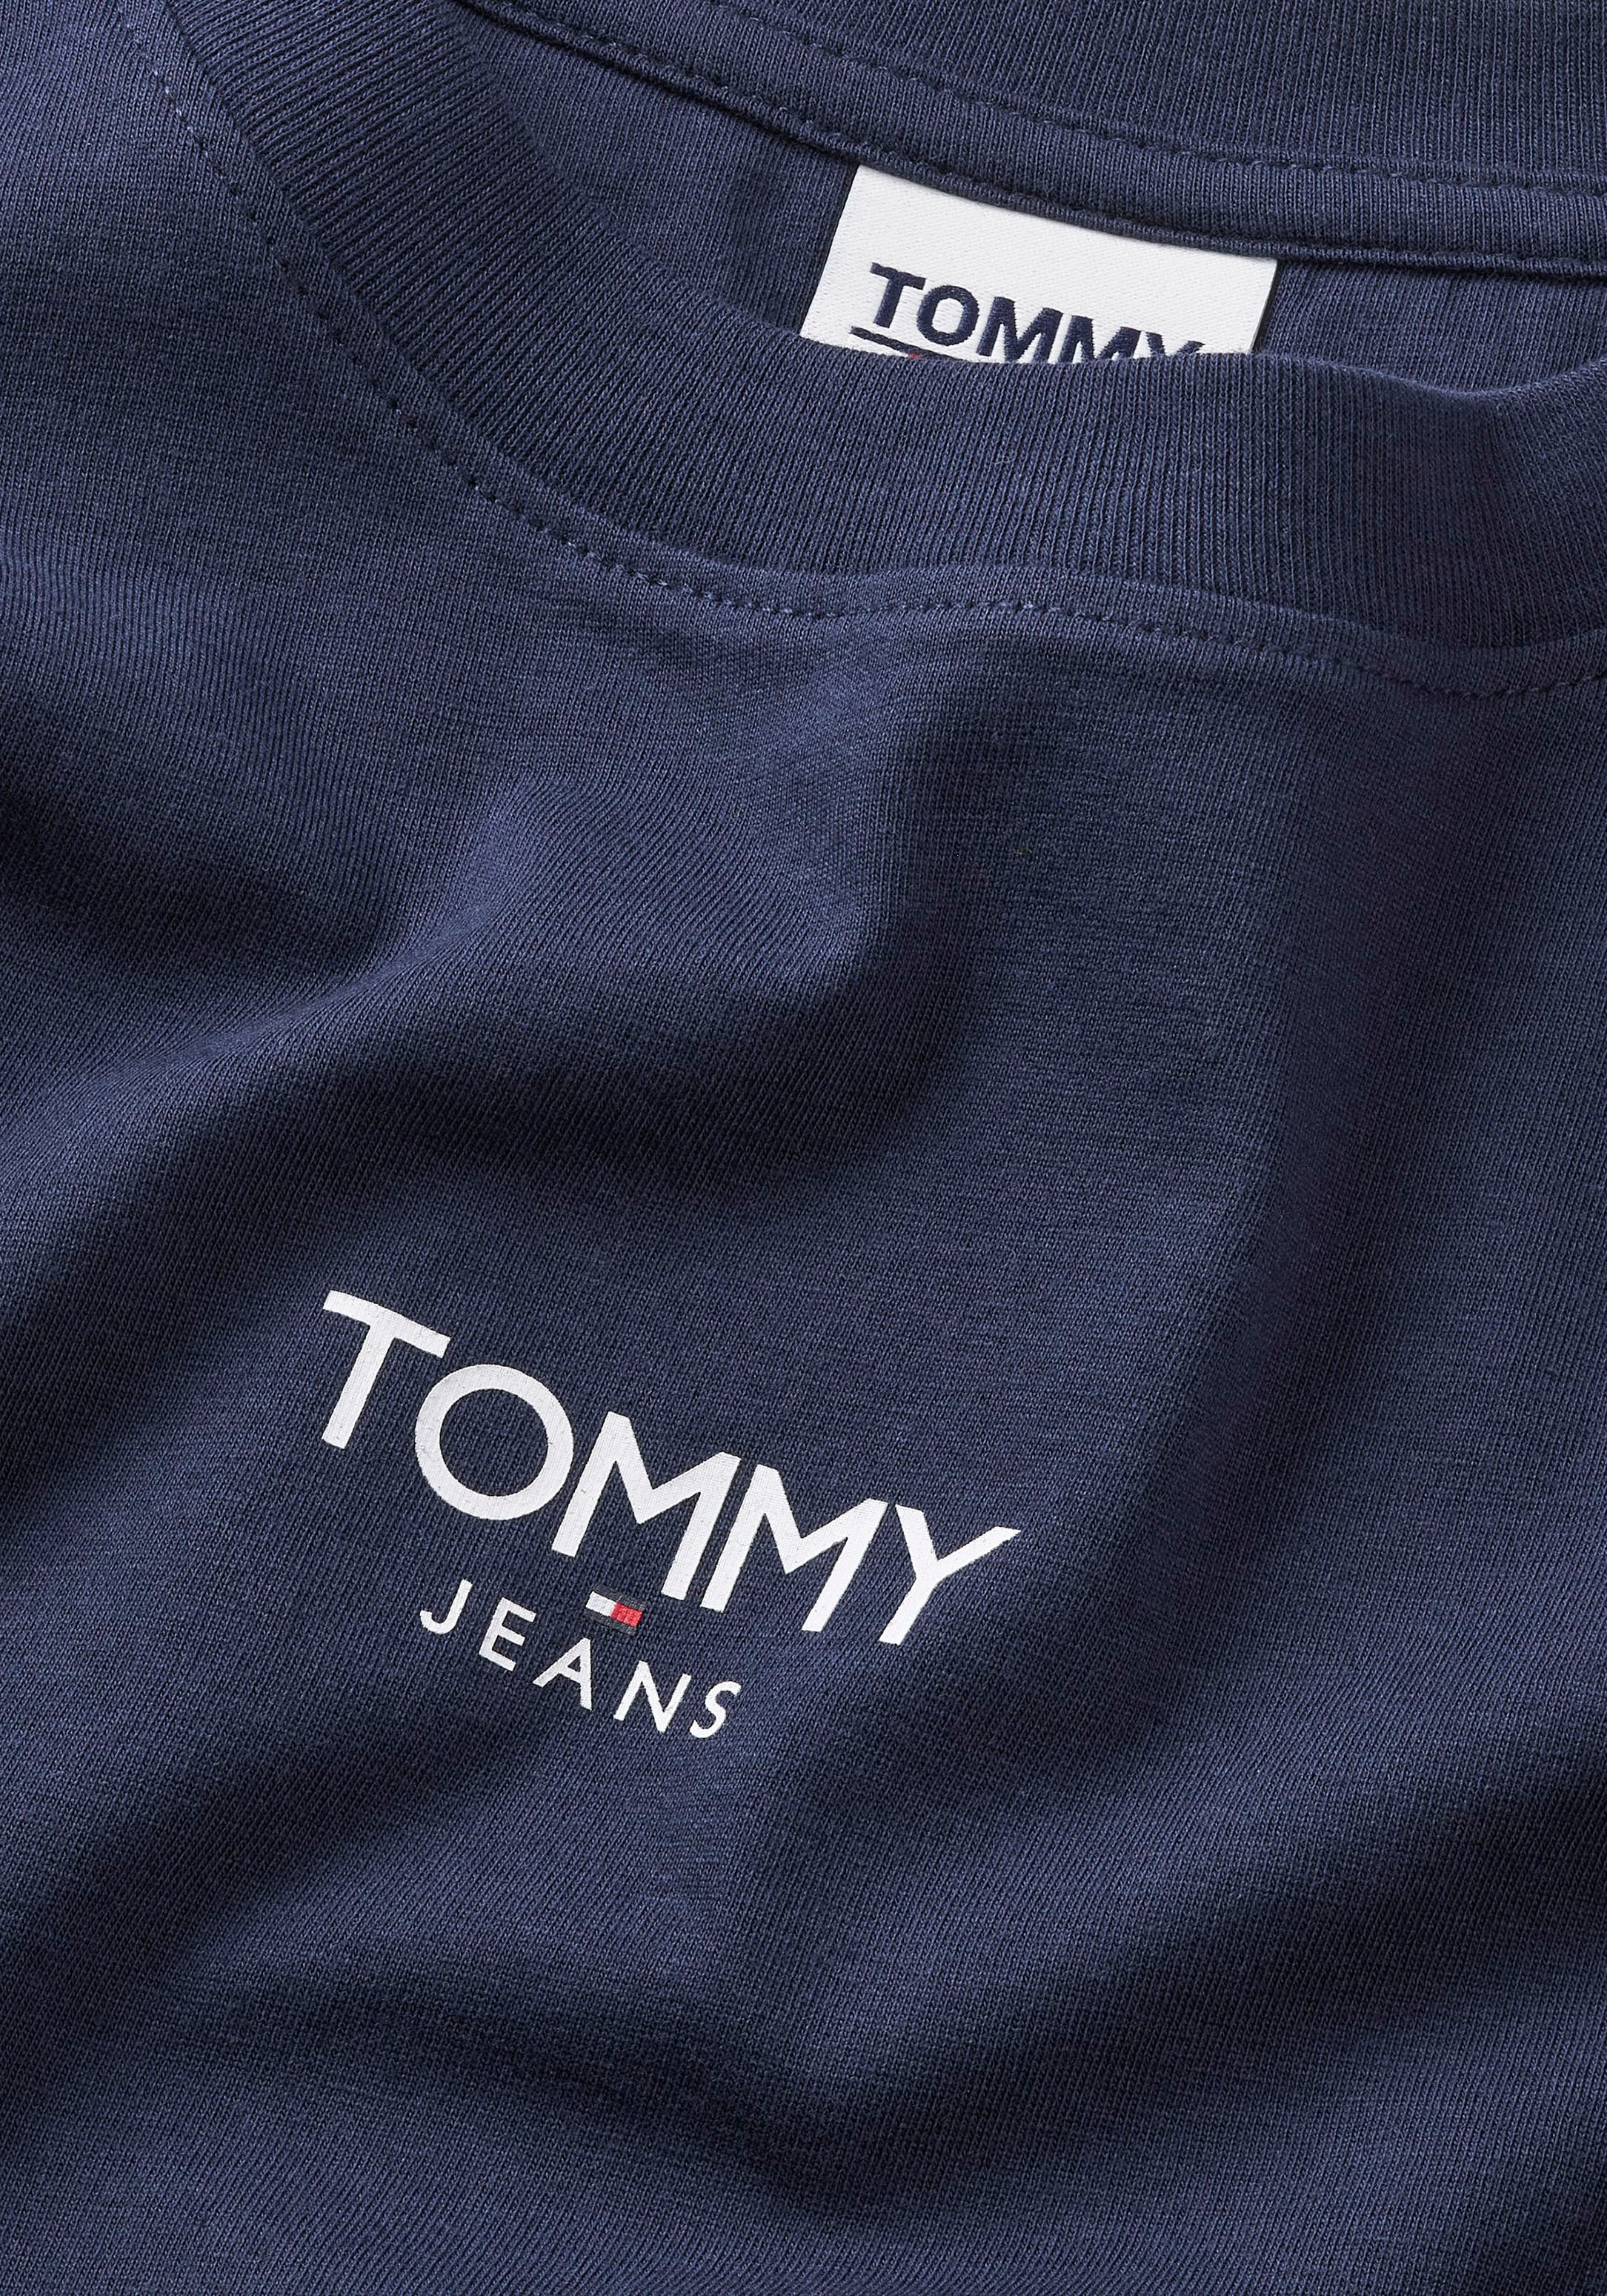 Tommy Jeans T-Shirt »TJW LOGO BBY ♕ 1 Jeans Logo Tommy bei SS«, ESSENTIAL mit